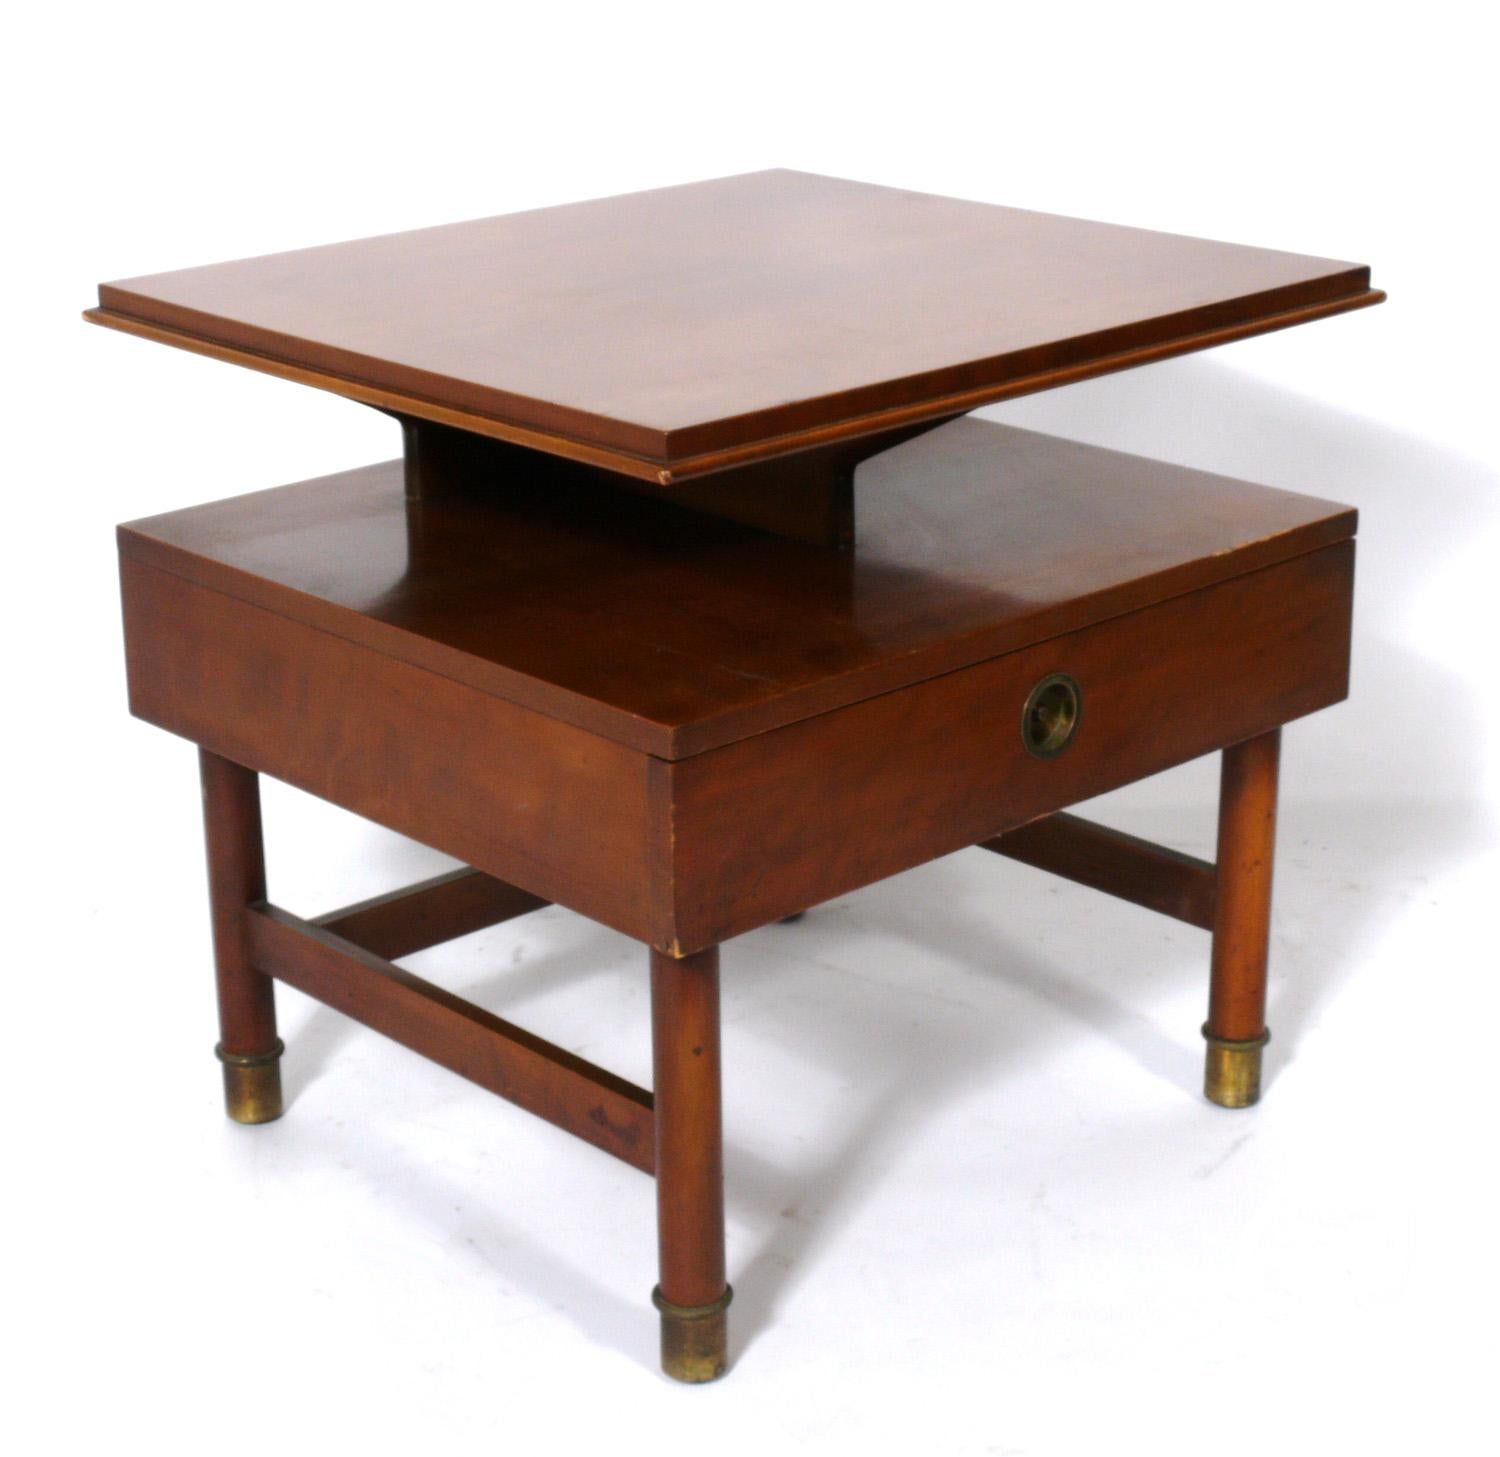 Pair of clean lined nightstands or end tables, designed by Renzo Rutili for Johnson Furniture, American, circa 1950s. They are a versatile size and can be used as end or side tables, or as night stands. They are currently being refinished, and can